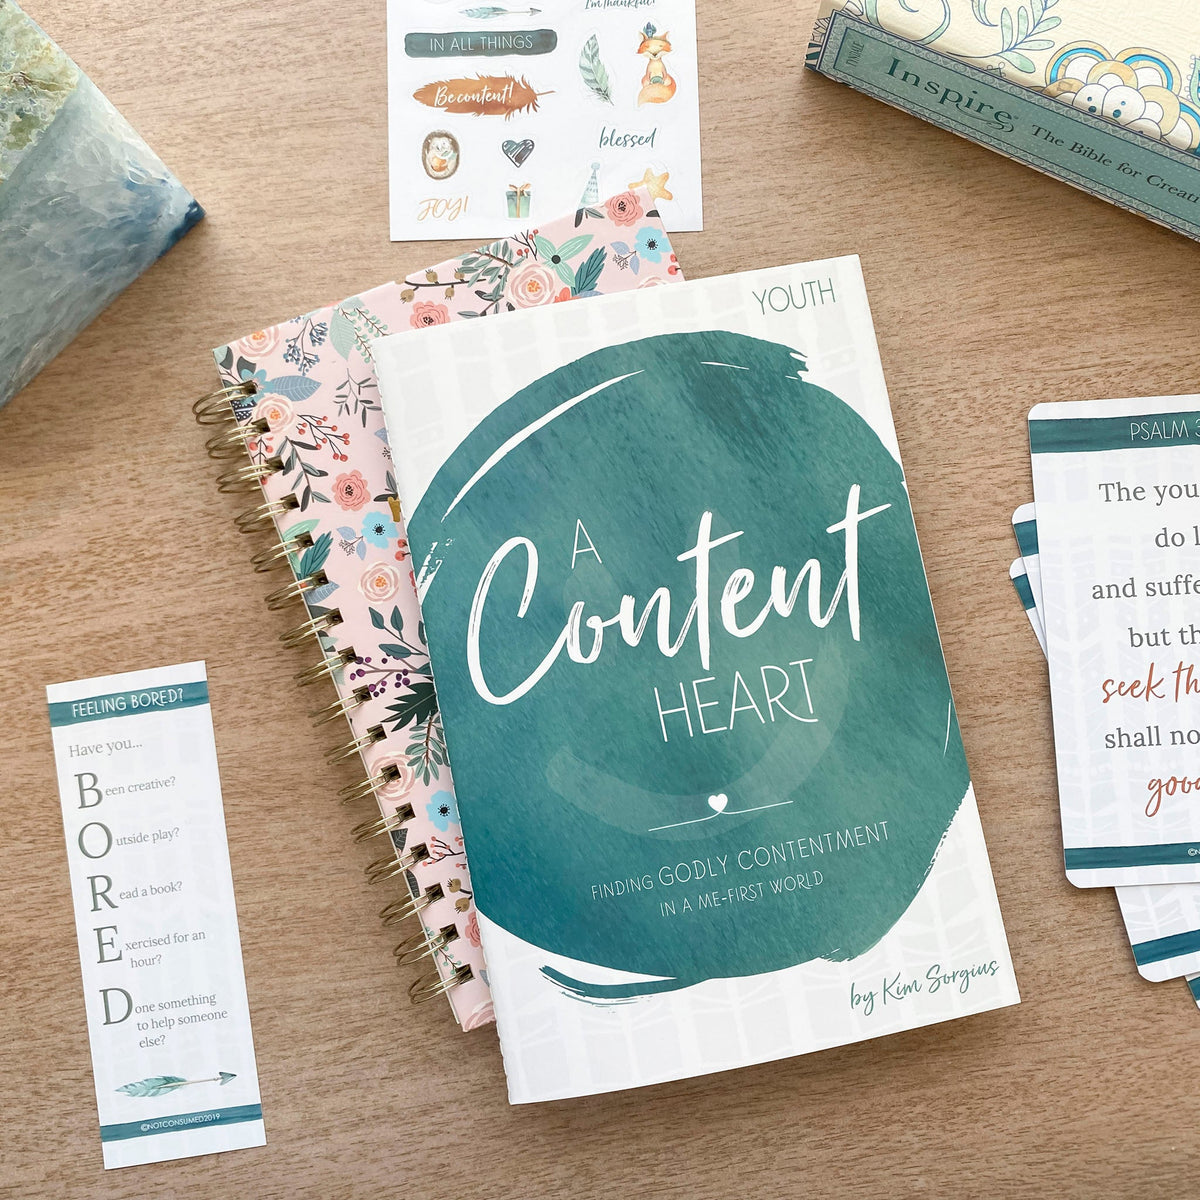 Contentment Bible study for teens